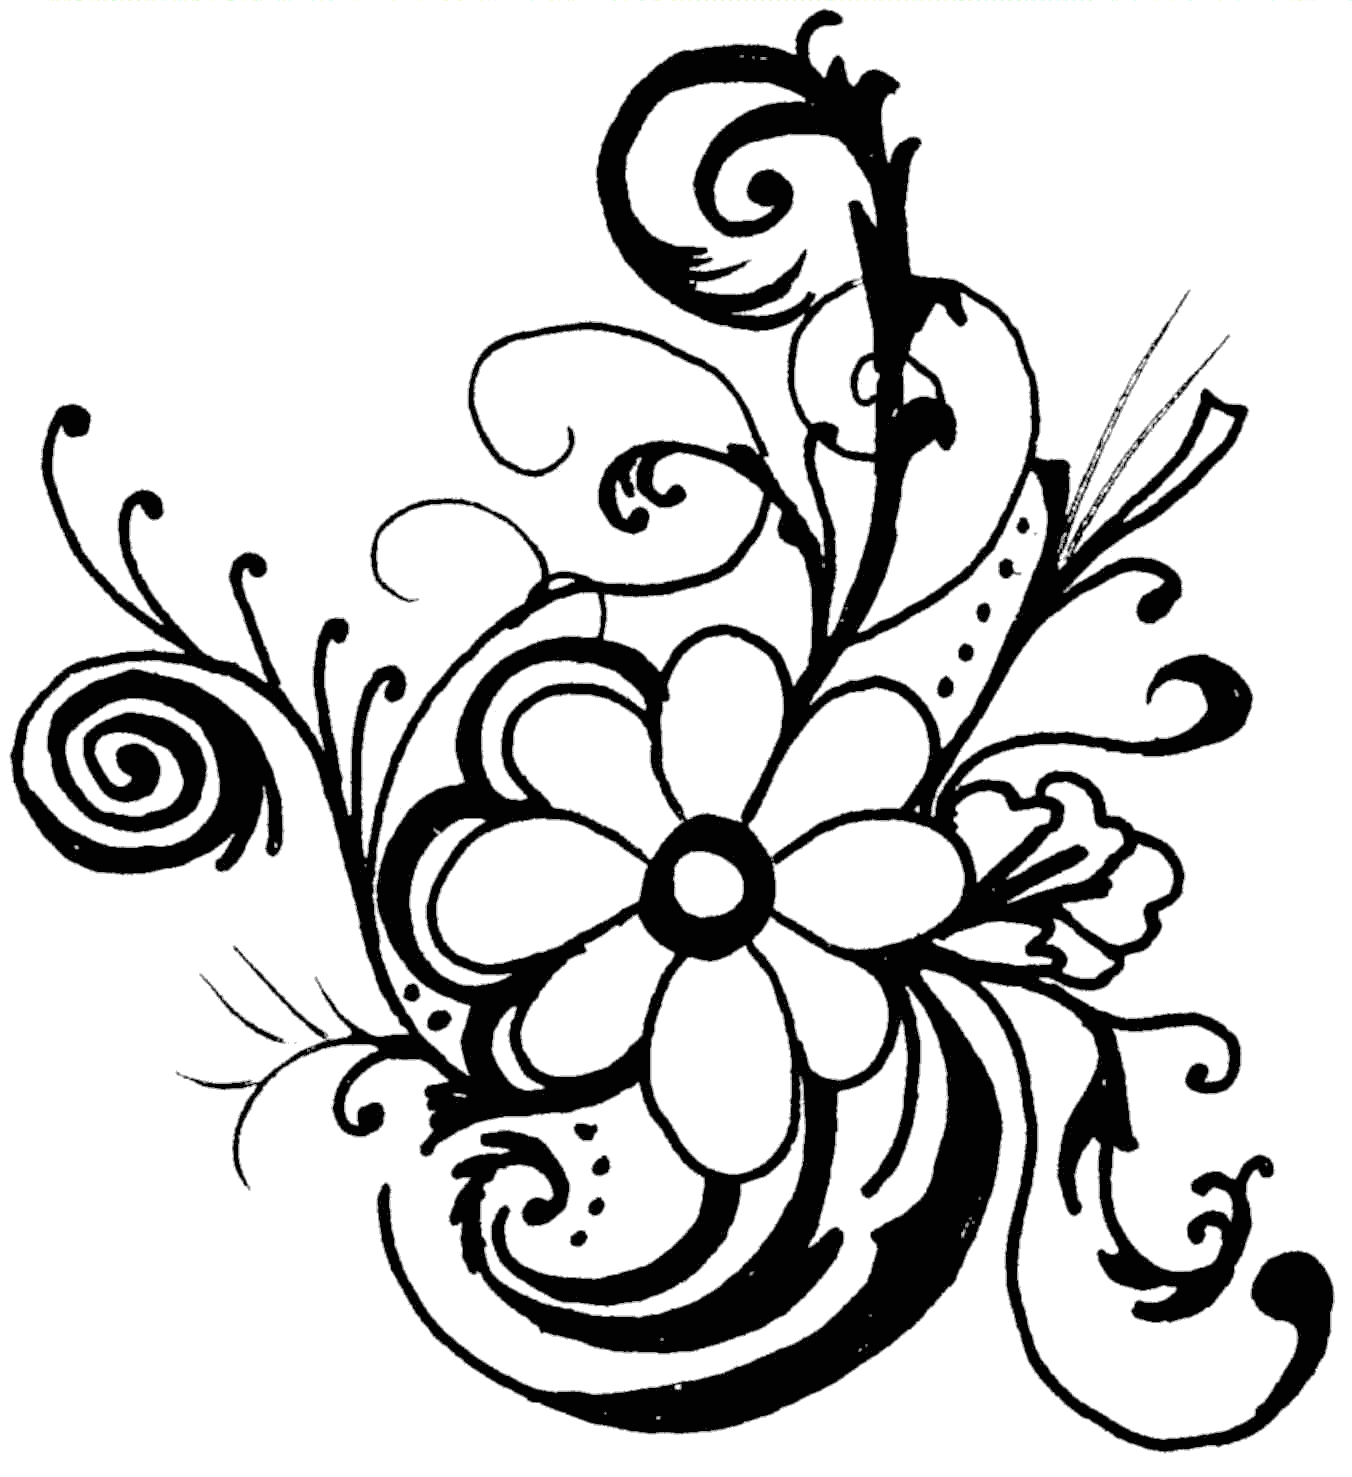 Black And White Flower Border Clipart   Clipart Panda   Free Clipart